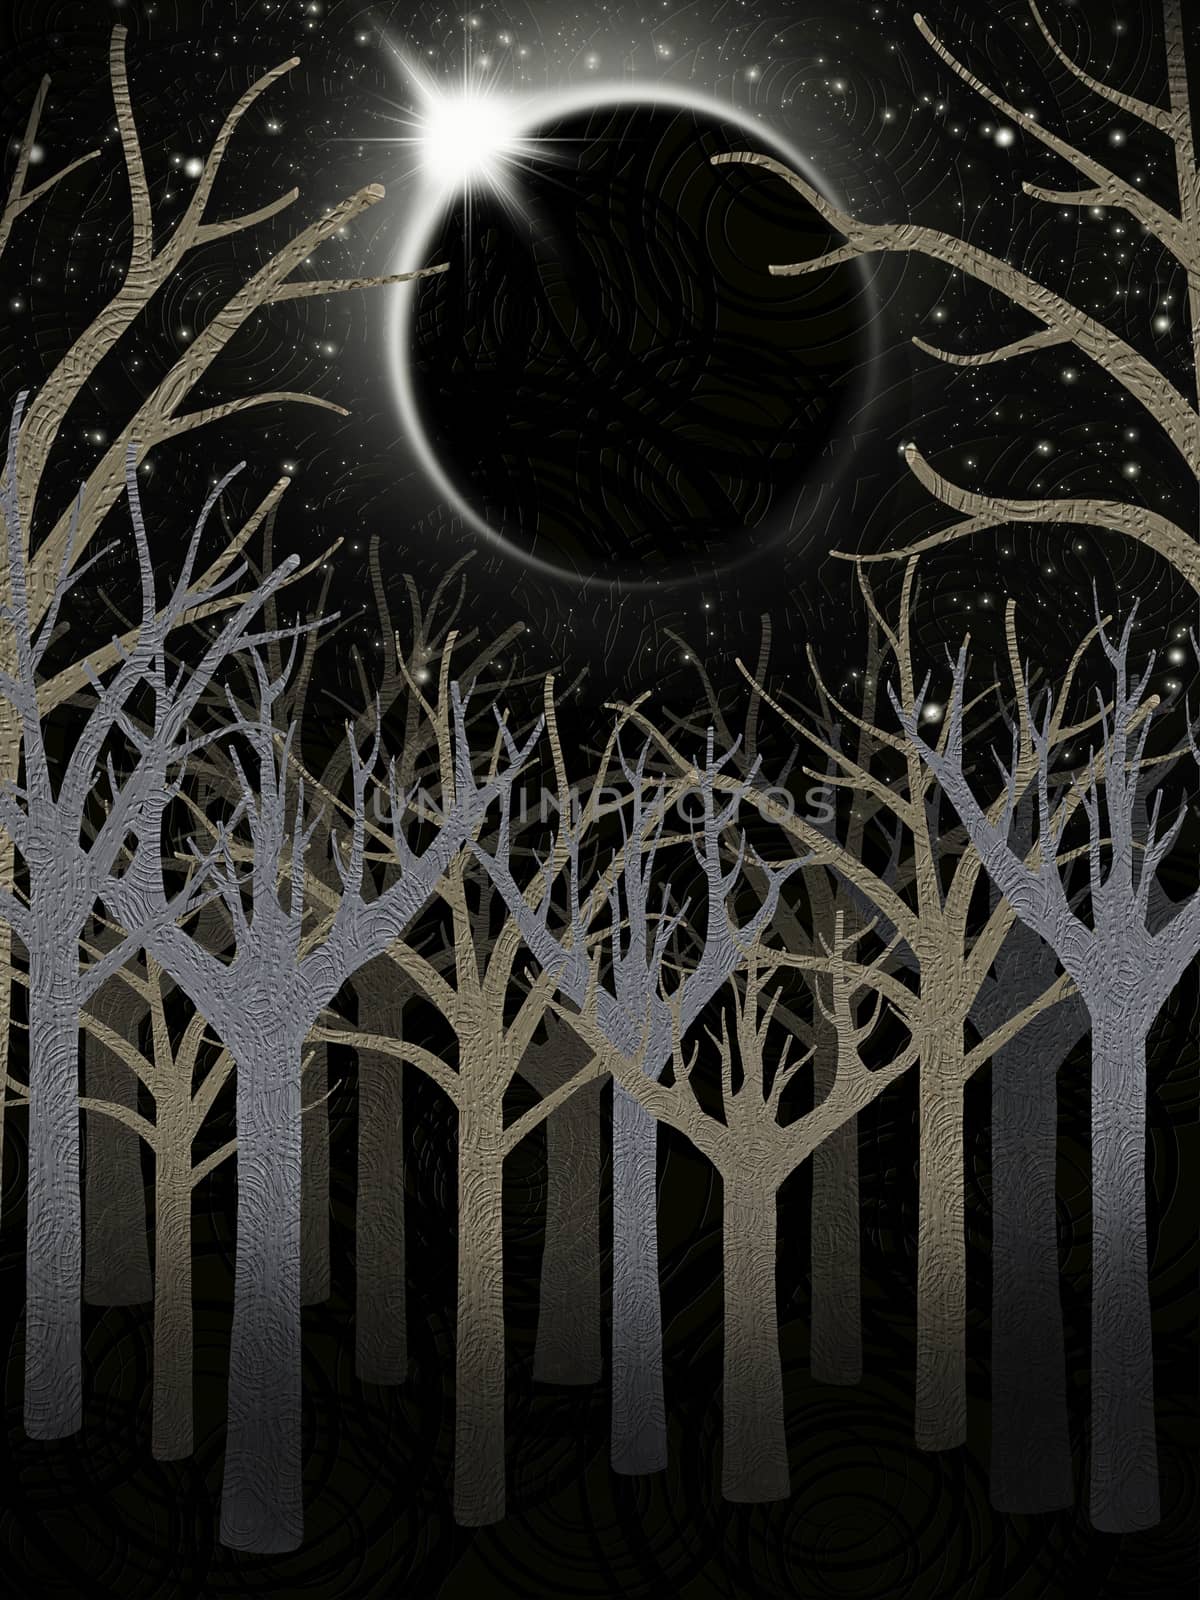 scary forest in the night by sette